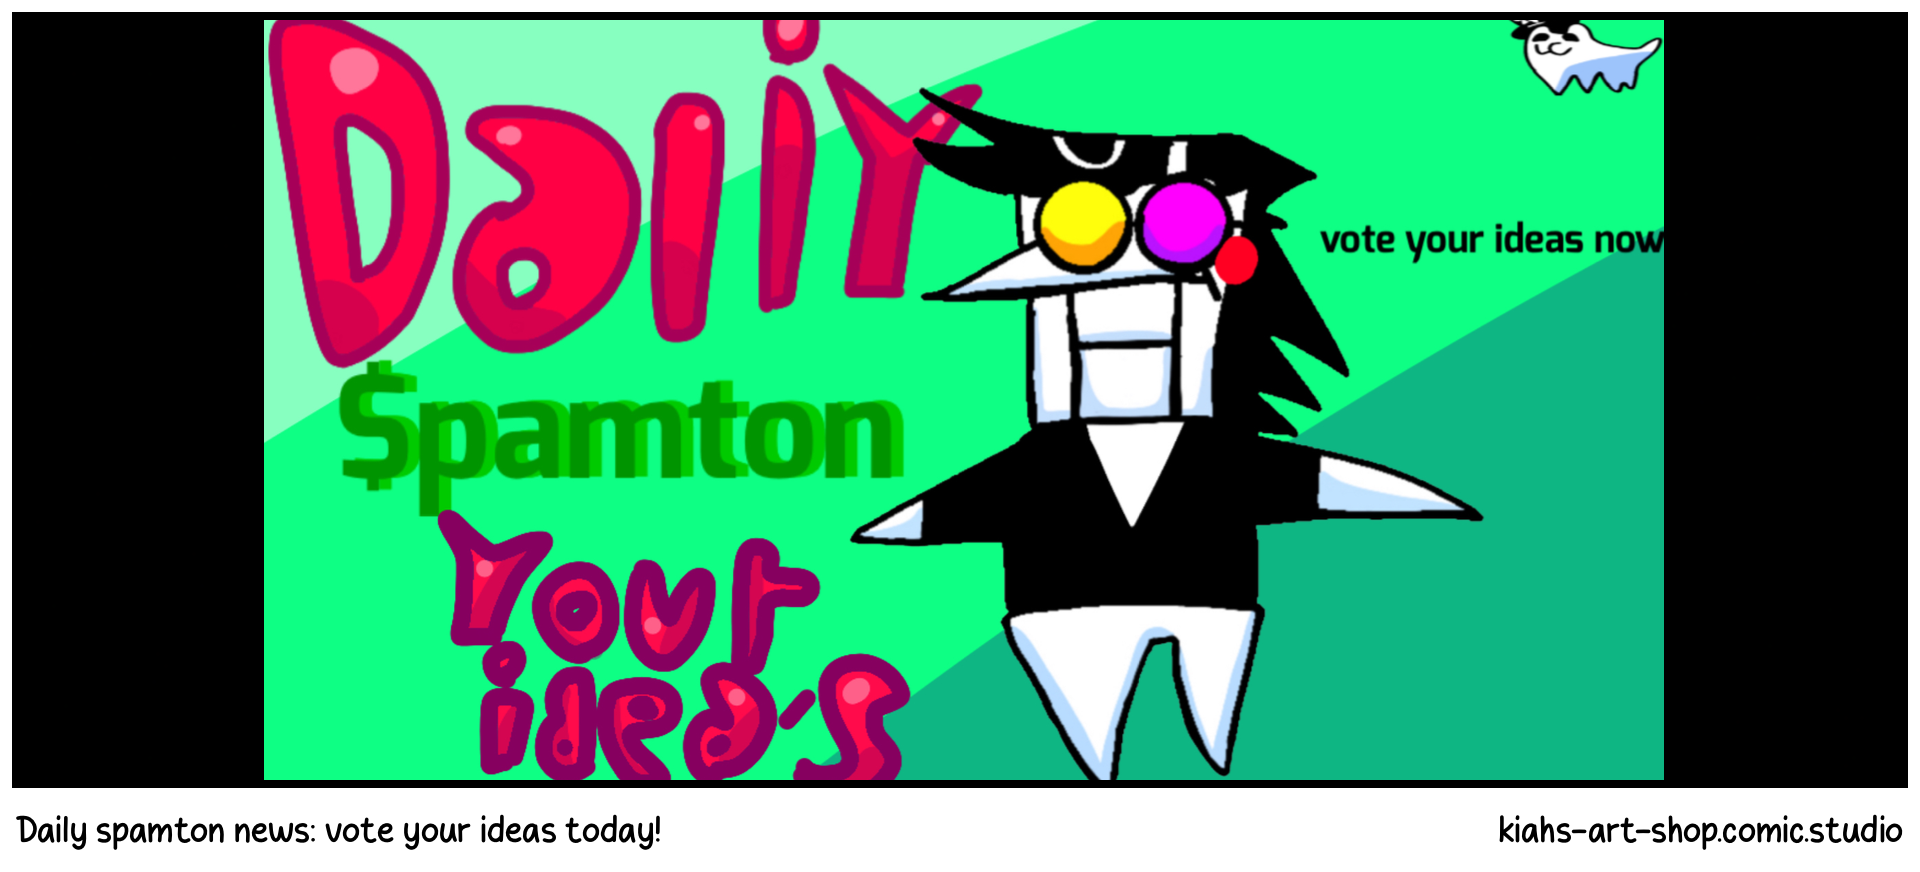 Daily spamton news: vote your ideas today!